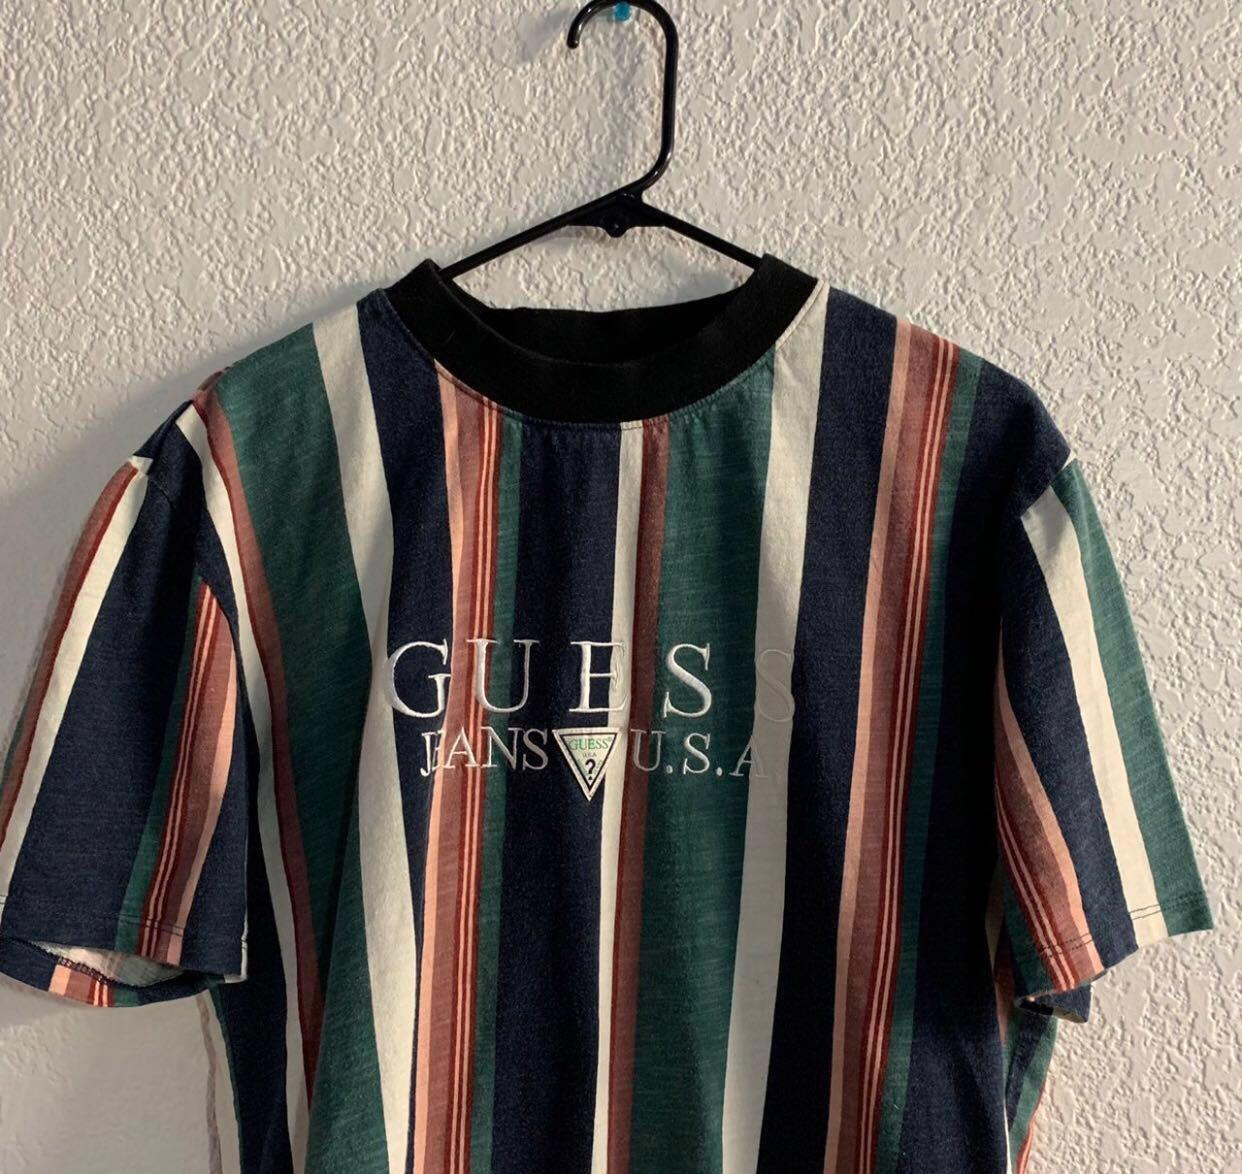 Authentic Guess Originals David Sayer Oversized tee, Tops, Shirts on